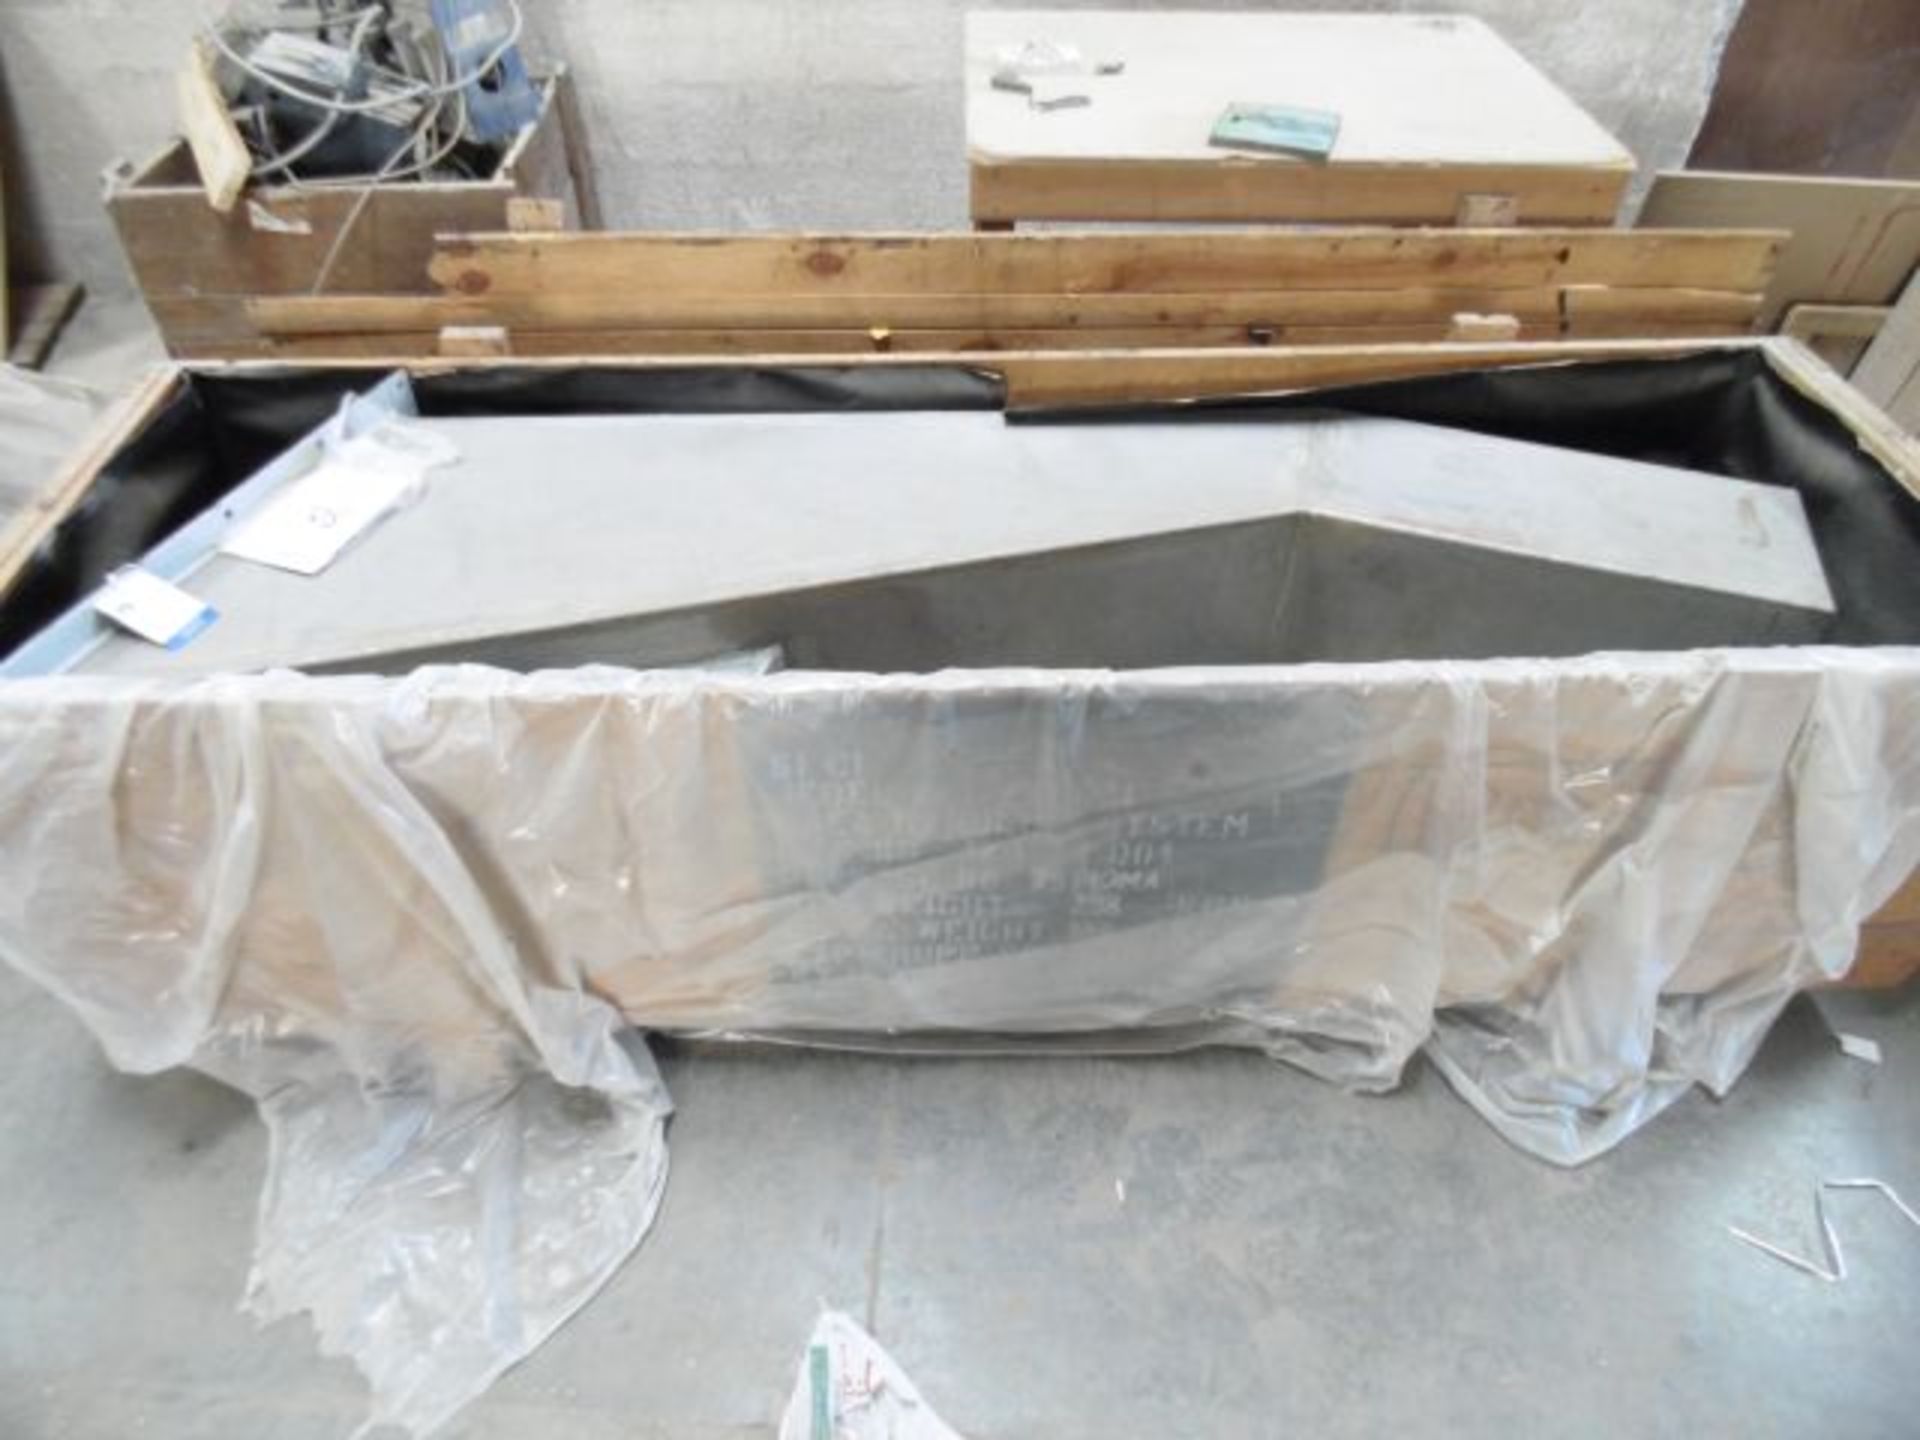 Stainless Steel Transfer Chute; net weight 298KG - Image 2 of 2